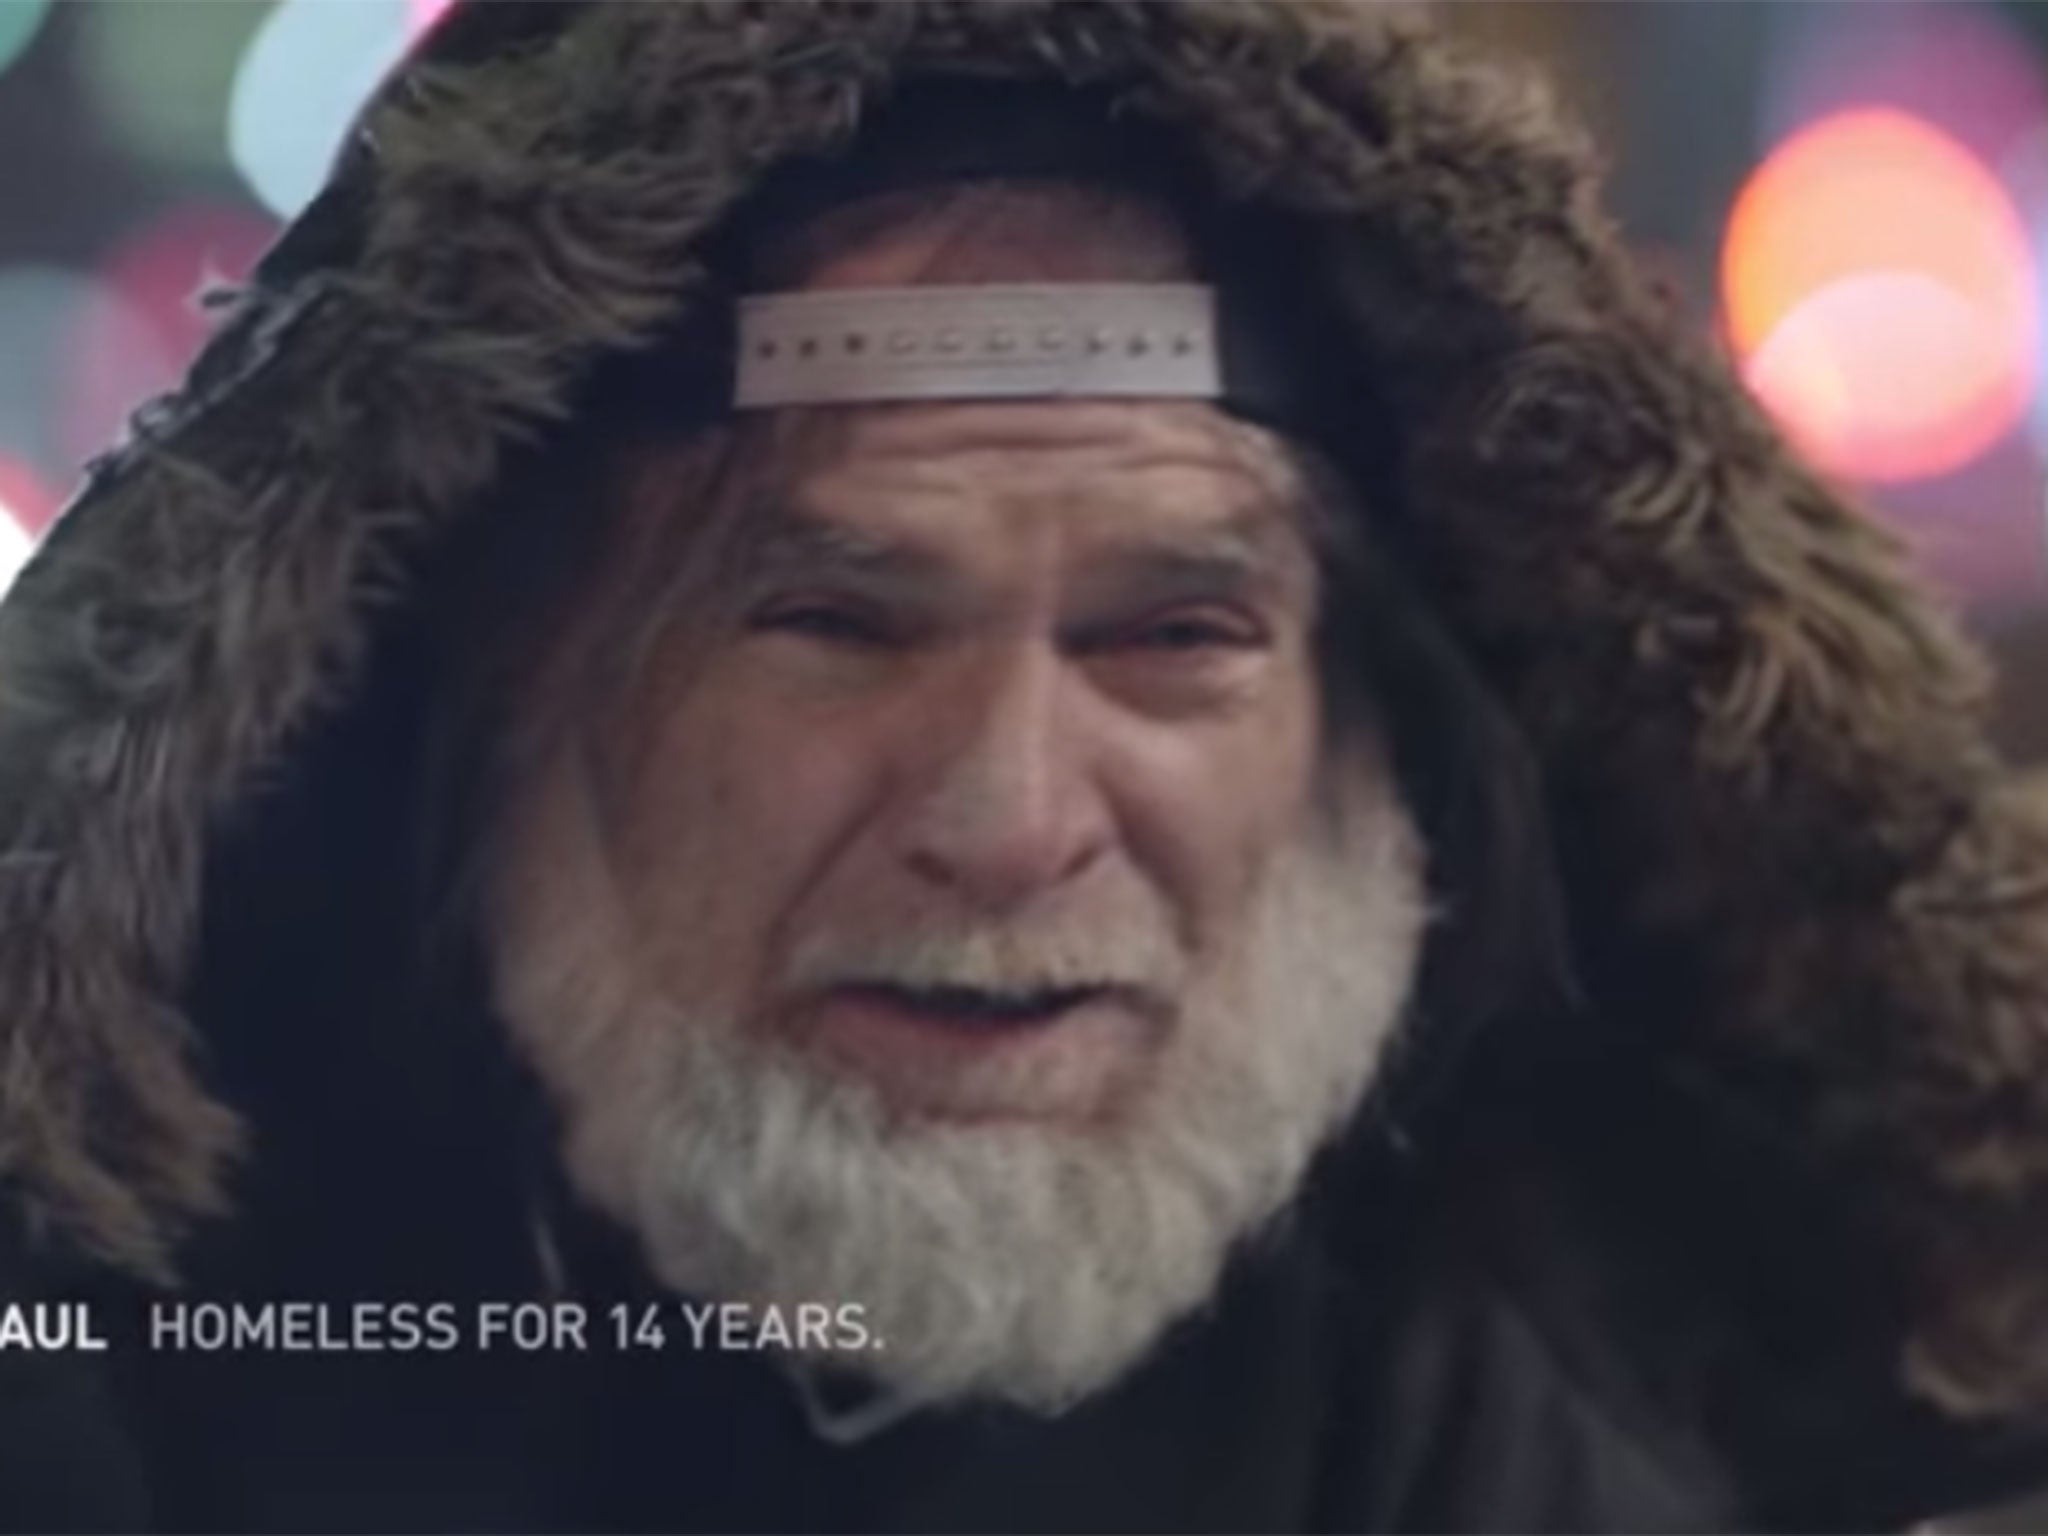 The tweets posted by Twitter users brought the homeless people to tears